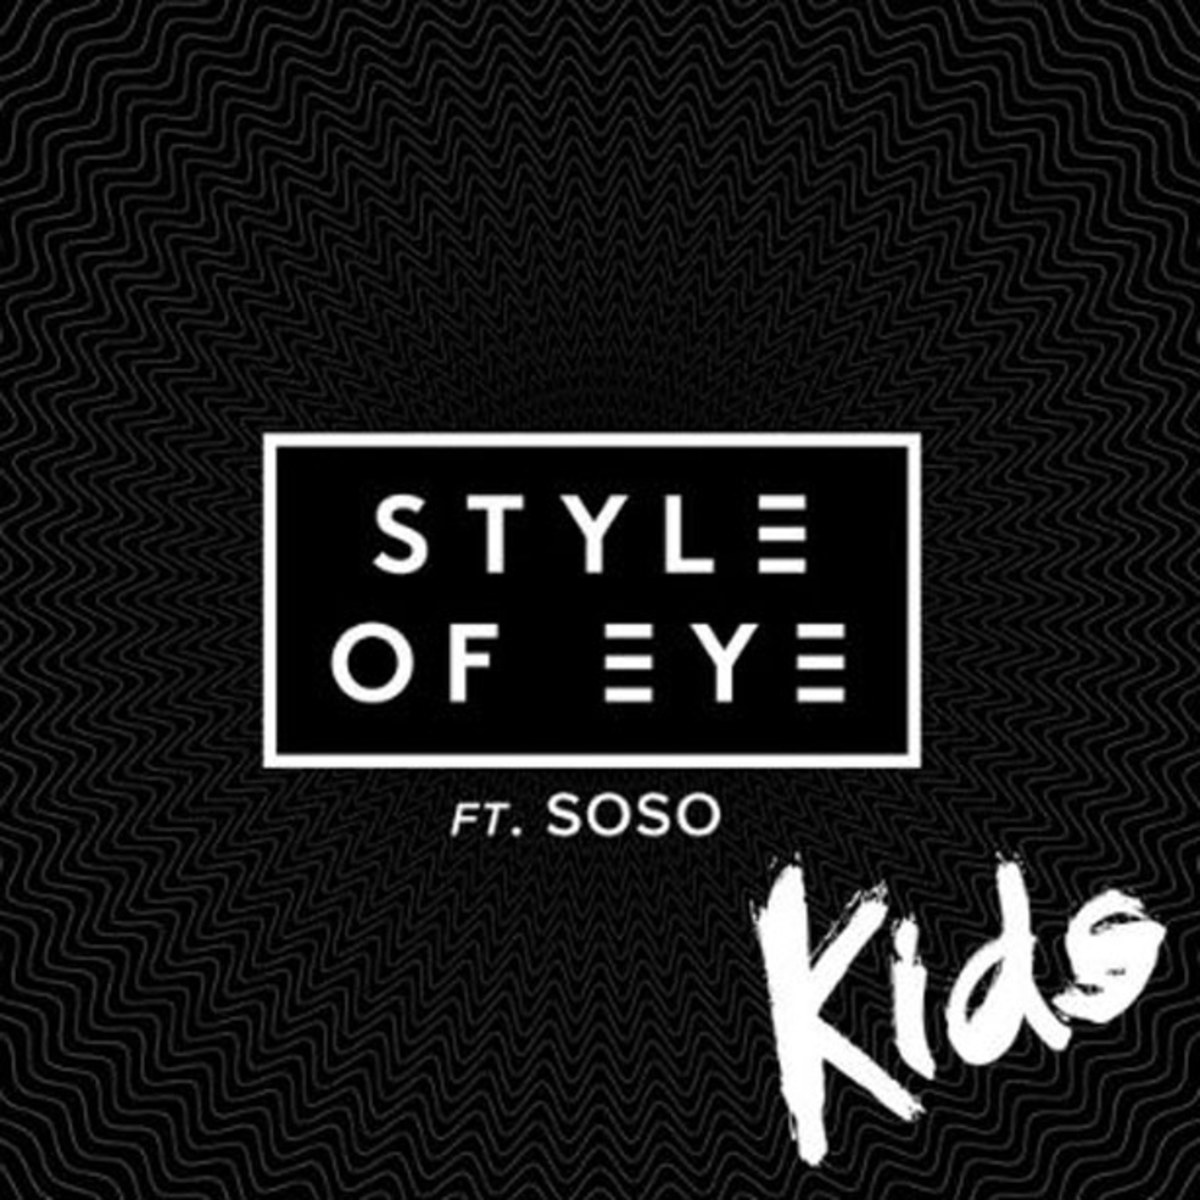 Style Of Eye Featuring Soso- "Kids" - New Electronic Music